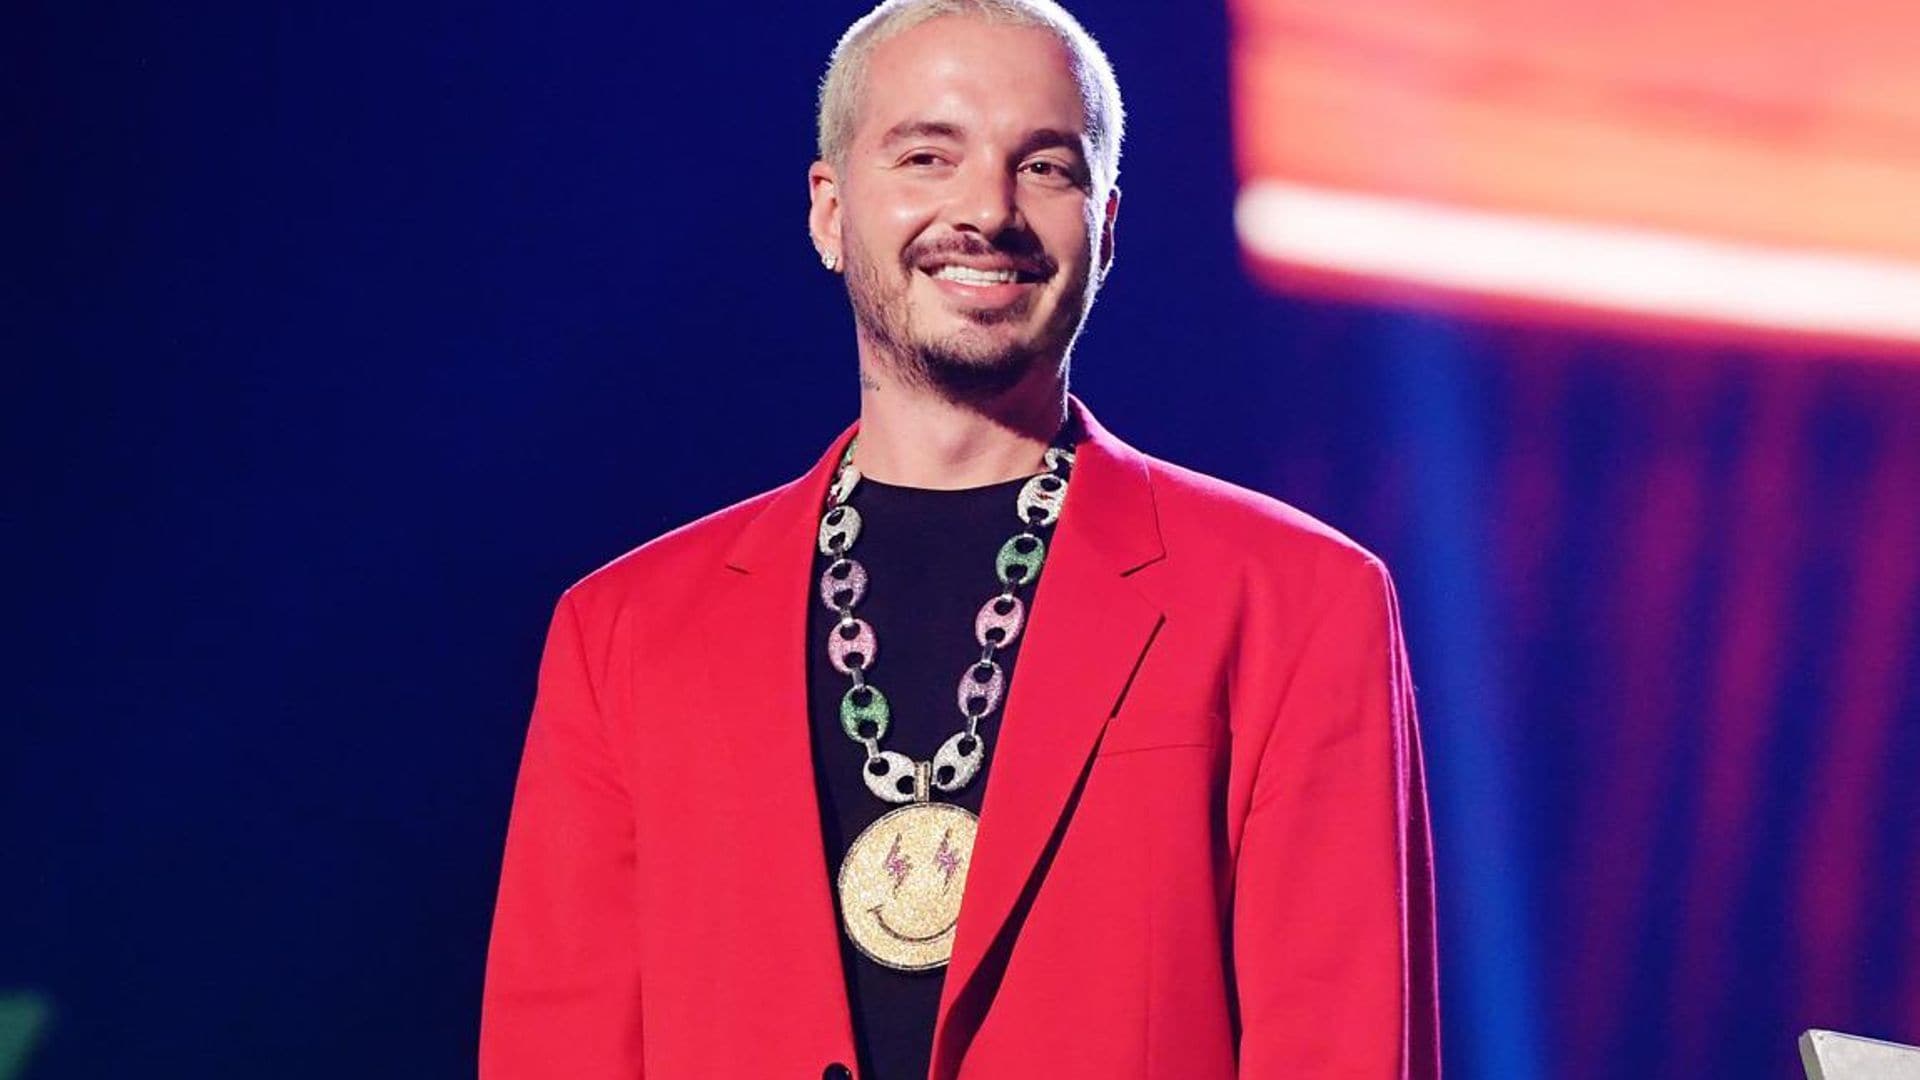 J Balvin opens up about his COVID-19 battle: ‘I got it bad’